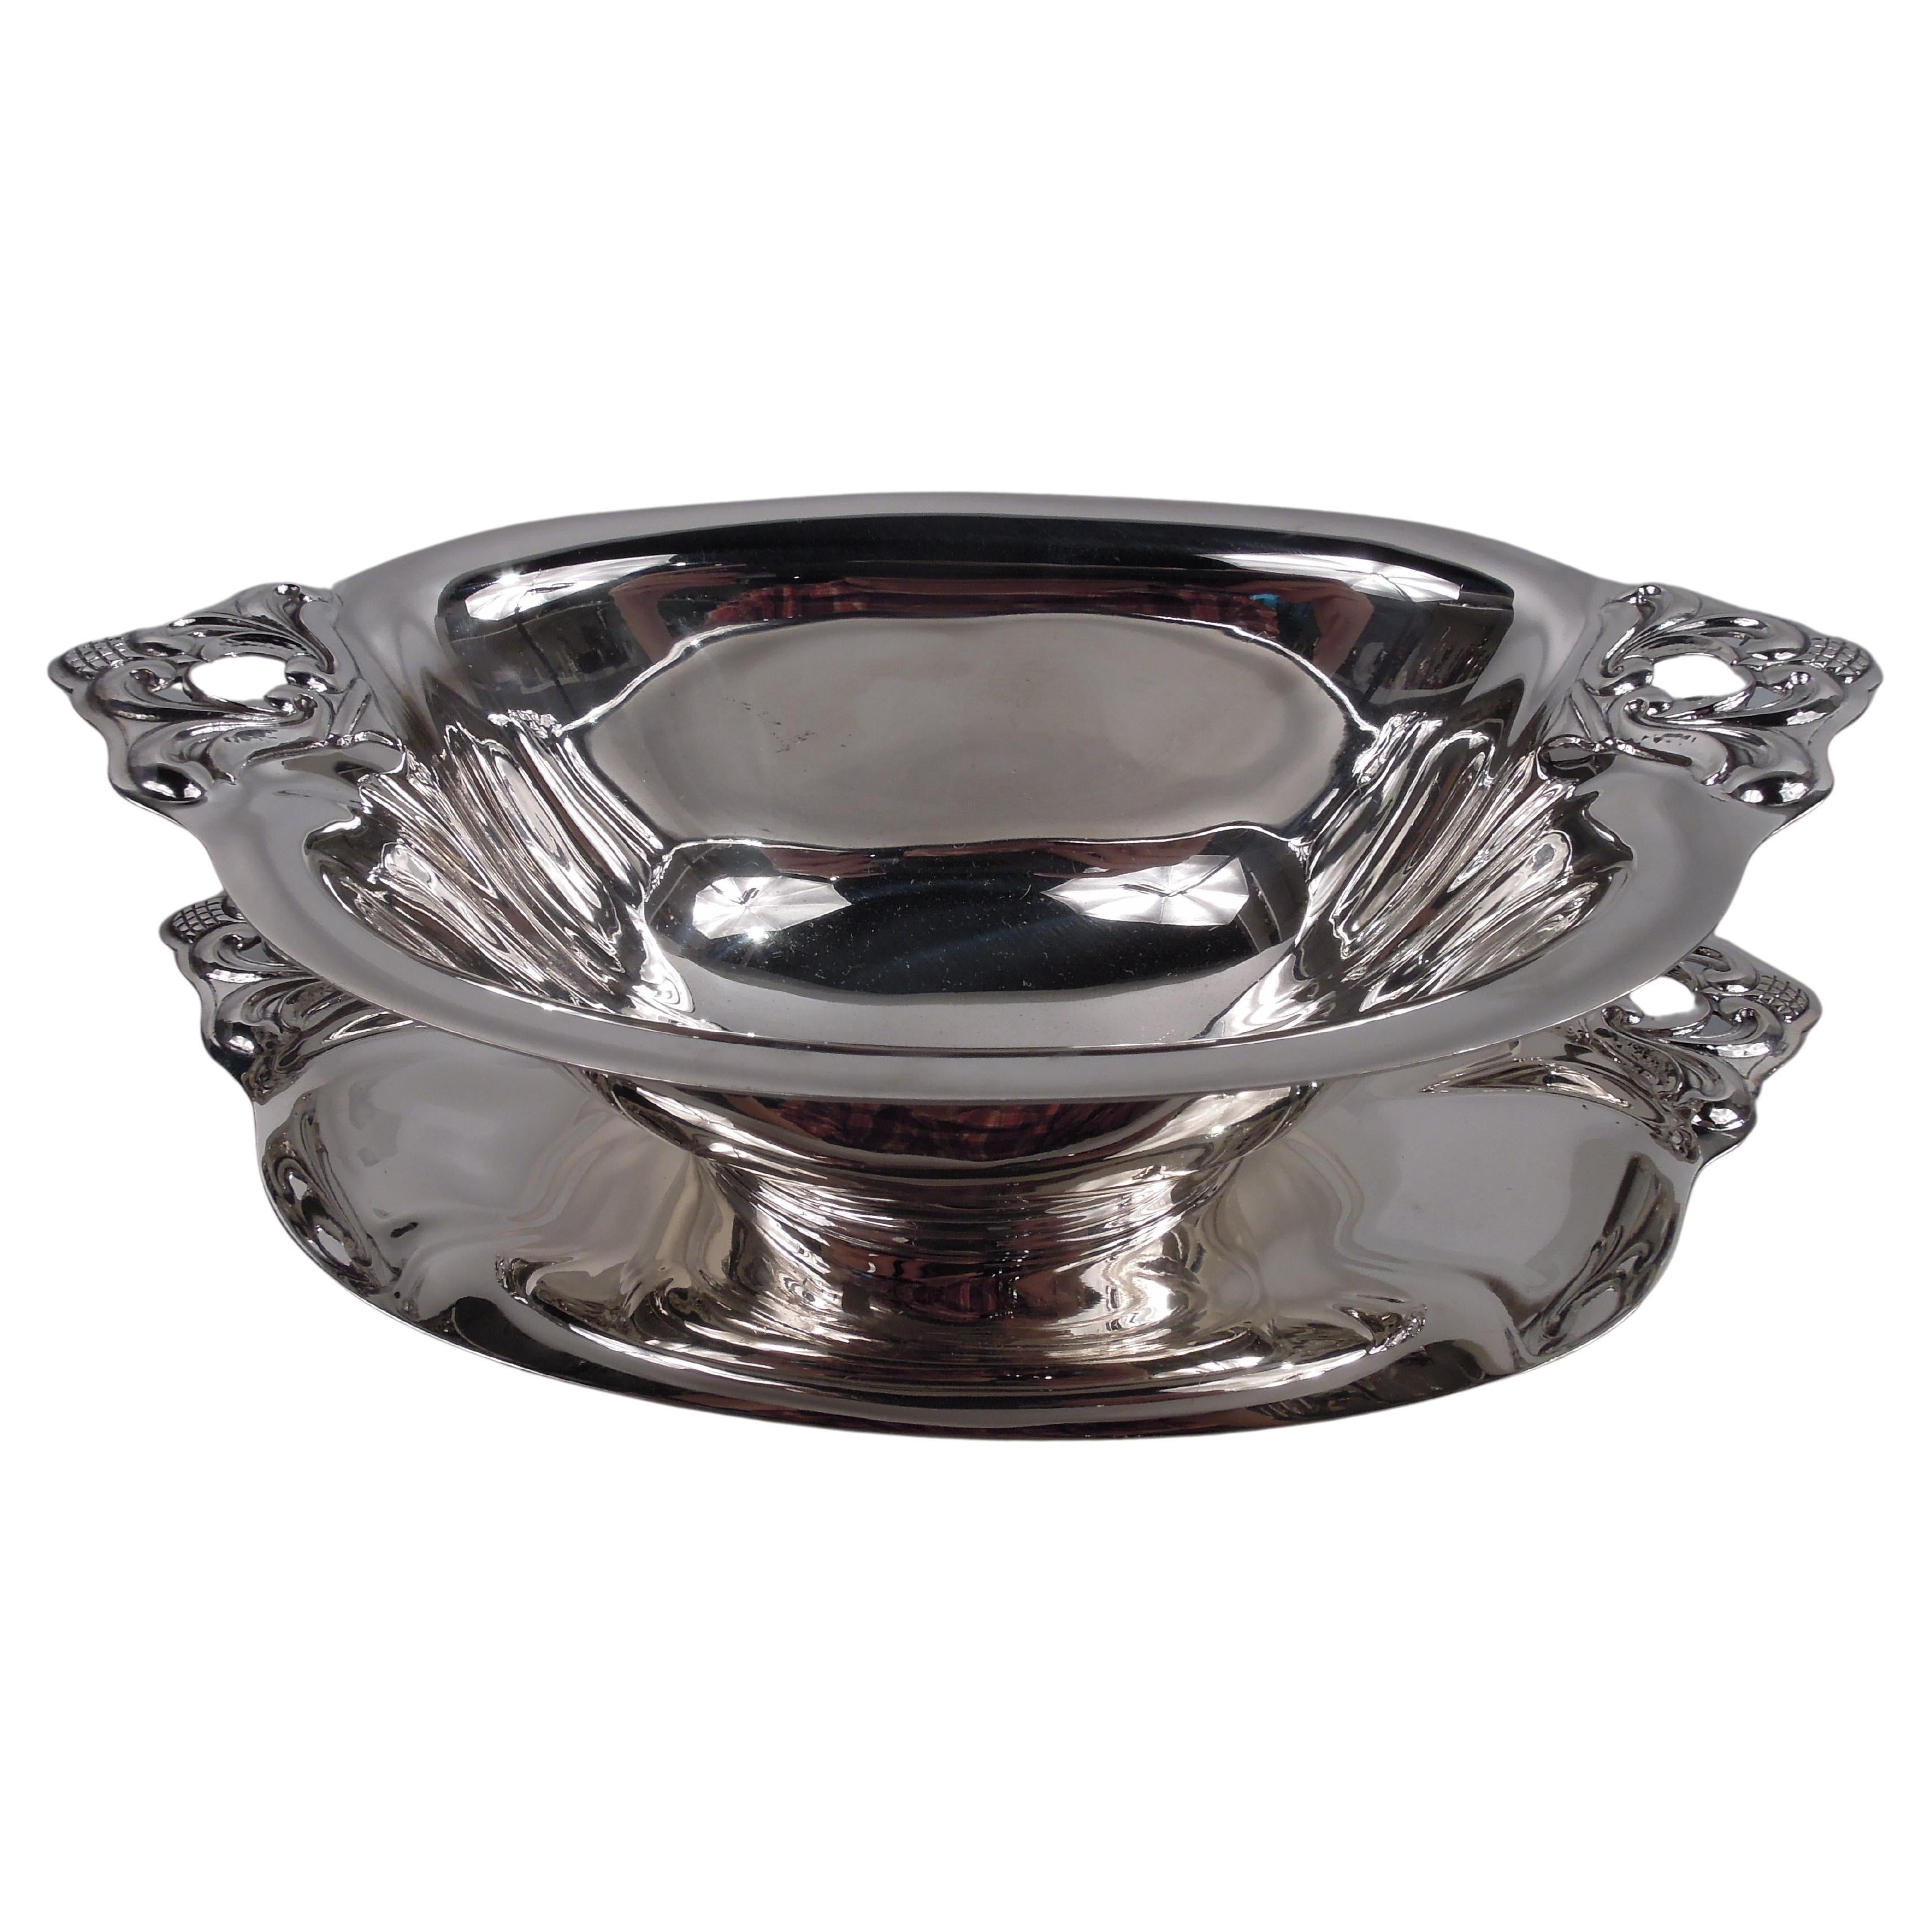 International Royal Danish Sterling Silver Sauce Bowl on Stand